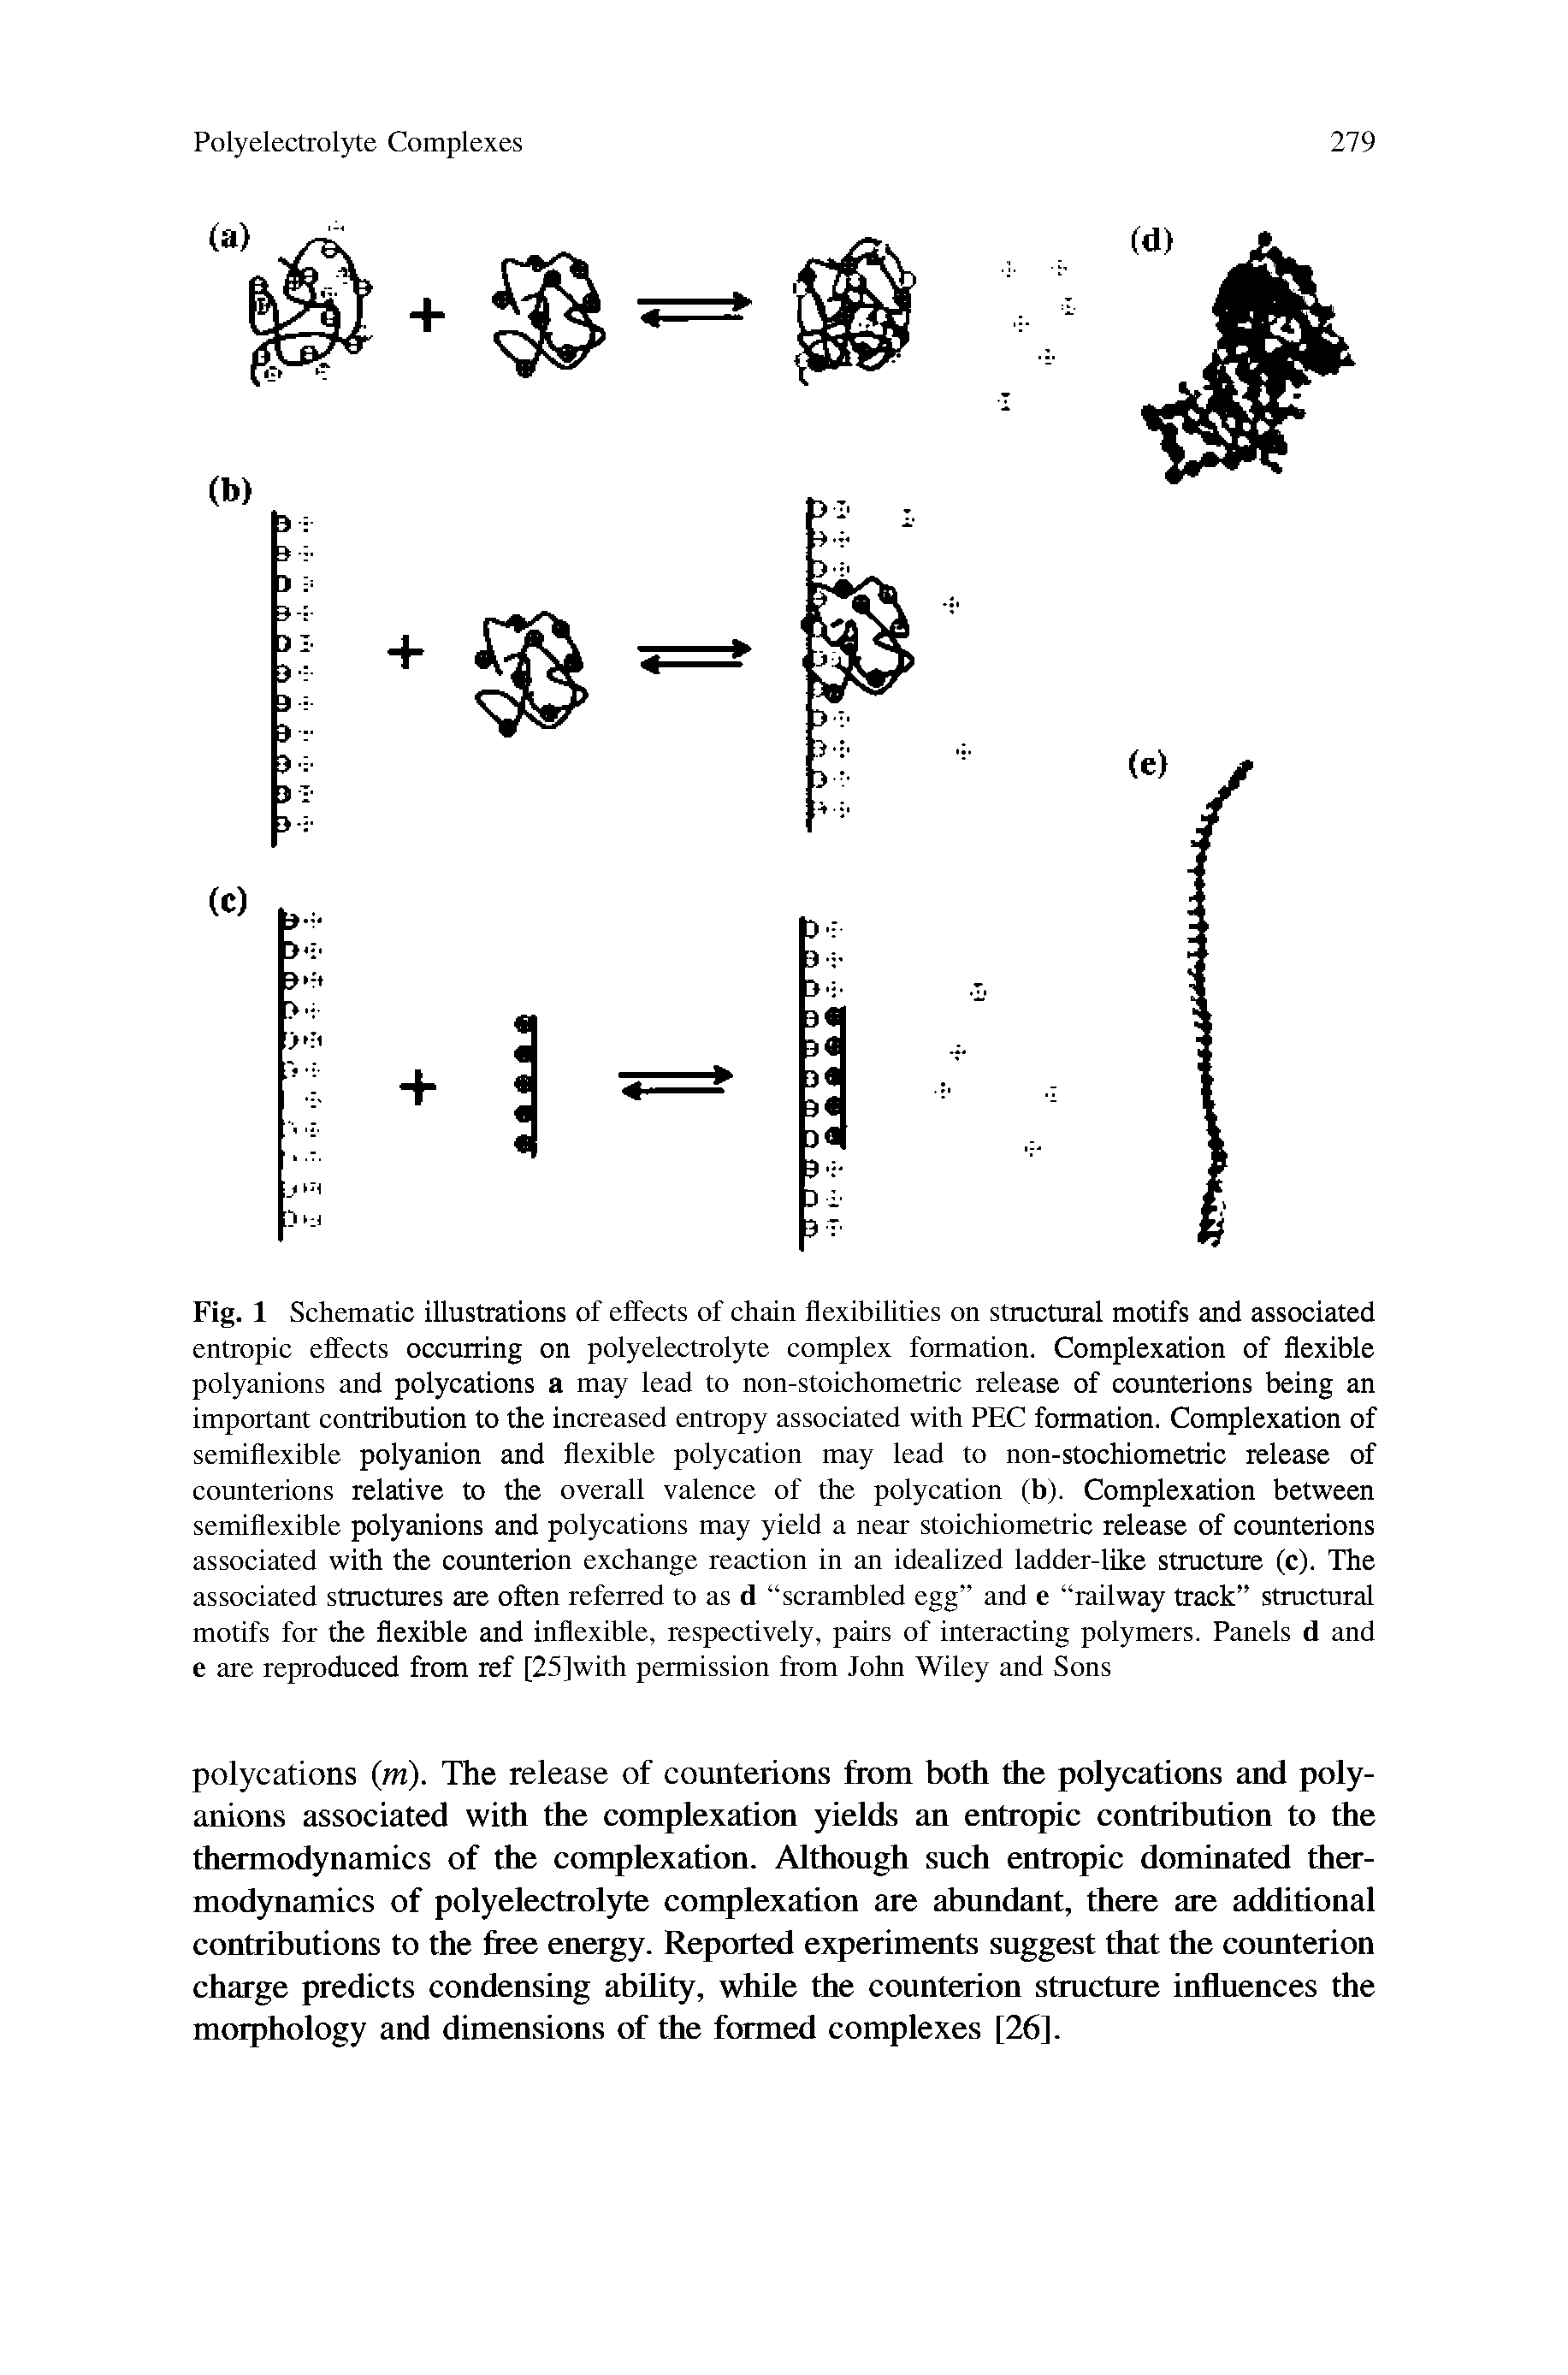 Fig. 1 Schematic illustrations of effects of chain flexibilities on stmctural motifs and associated entropic effects occurring on polyelectrolyte complex formation. Complexation of flexible polyanions and polycations a may lead to non-stoichometric release of counterions being an important contribution to the increased entropy associated with PEC formation. Complexation of semiflexible polyanion and flexible polycation may lead to non-stochiometric release of counterions relative to the overall valence of the polycation (b). Complexation between semiflexible polyanions and polycations may yield a near stoichiometric release of counterions associated with the counterion exchange reaction in an idealized ladder-lUse structure (c). The associated structures are often referred to as d scrambled egg and e railway track structural motifs for the flexible and inflexible, respectively, pairs of interacting polymers. Panels d and e are reproduced from ref [25]with permission from John Wiley and Sons...